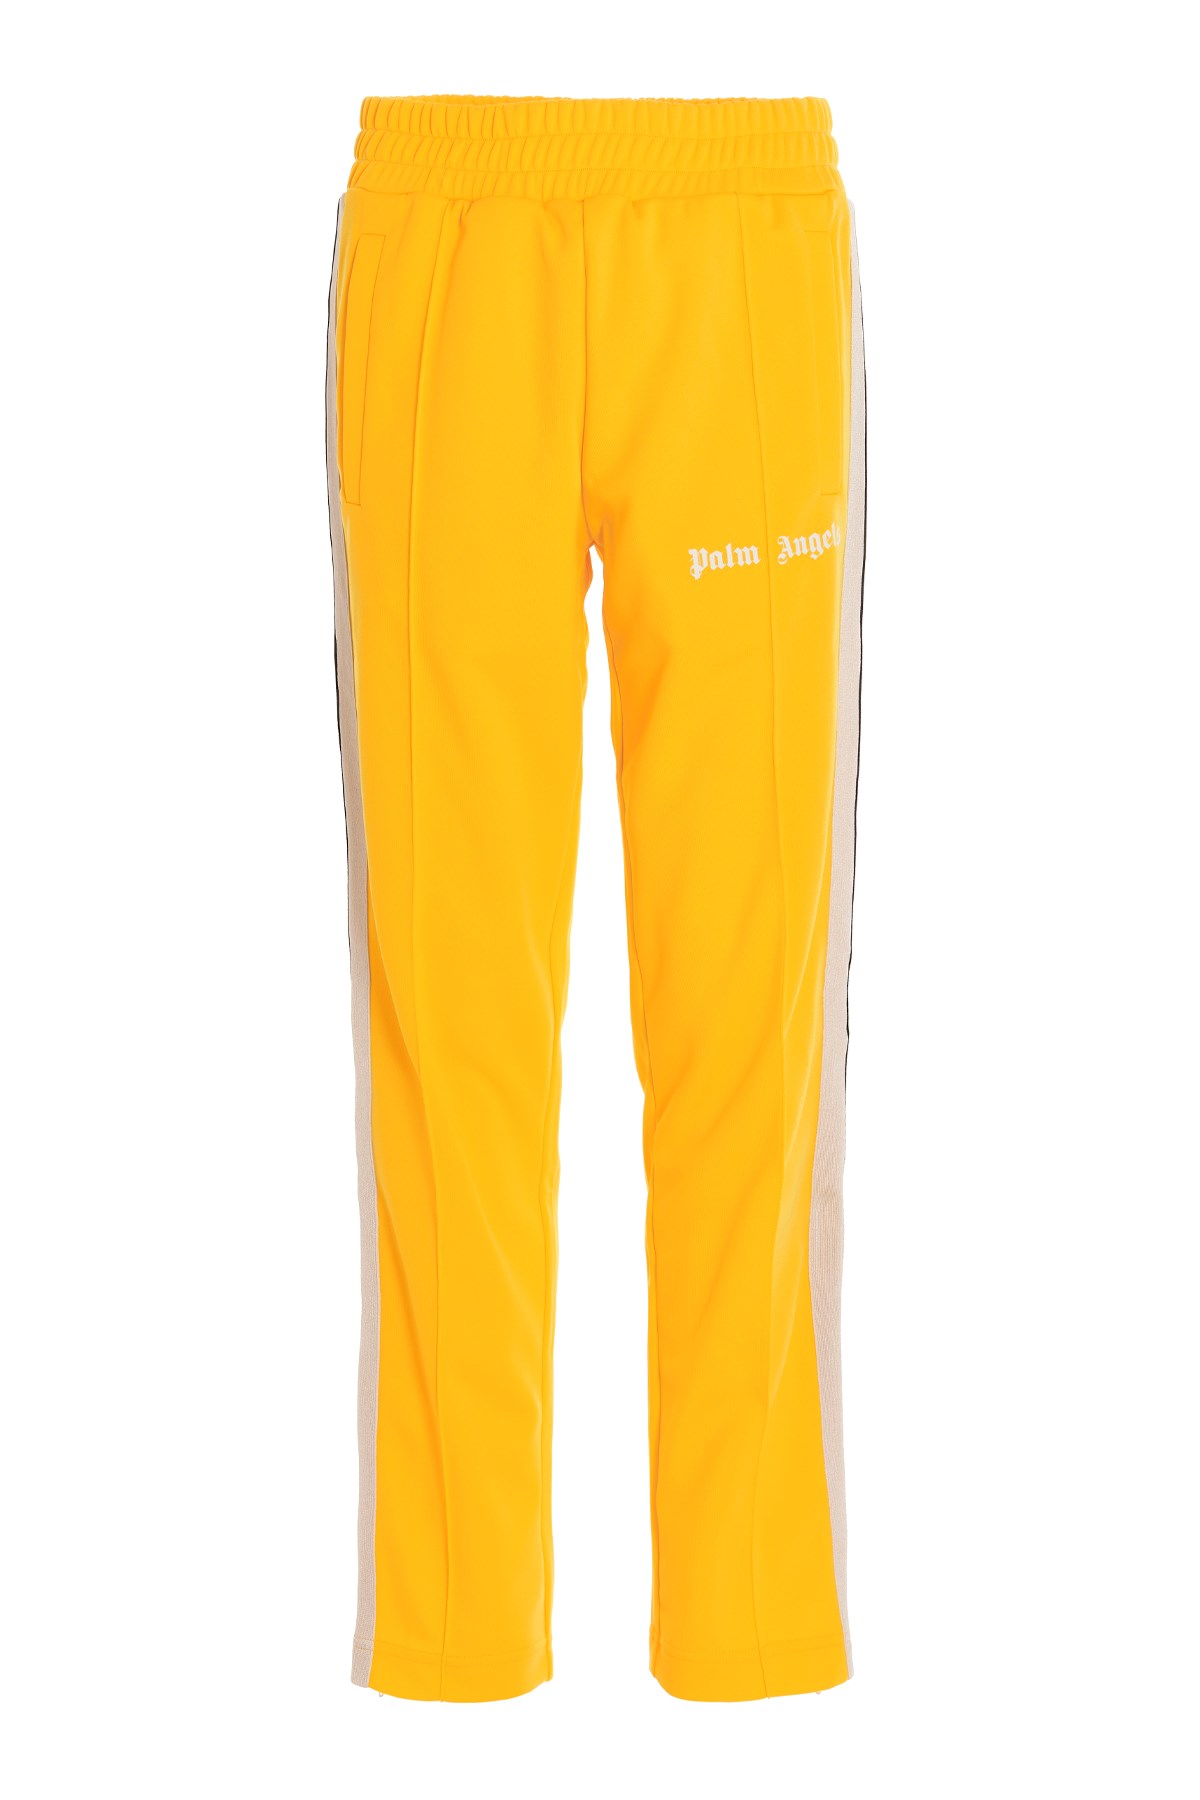 PALM ANGELS Joggers With Contrasting Bands